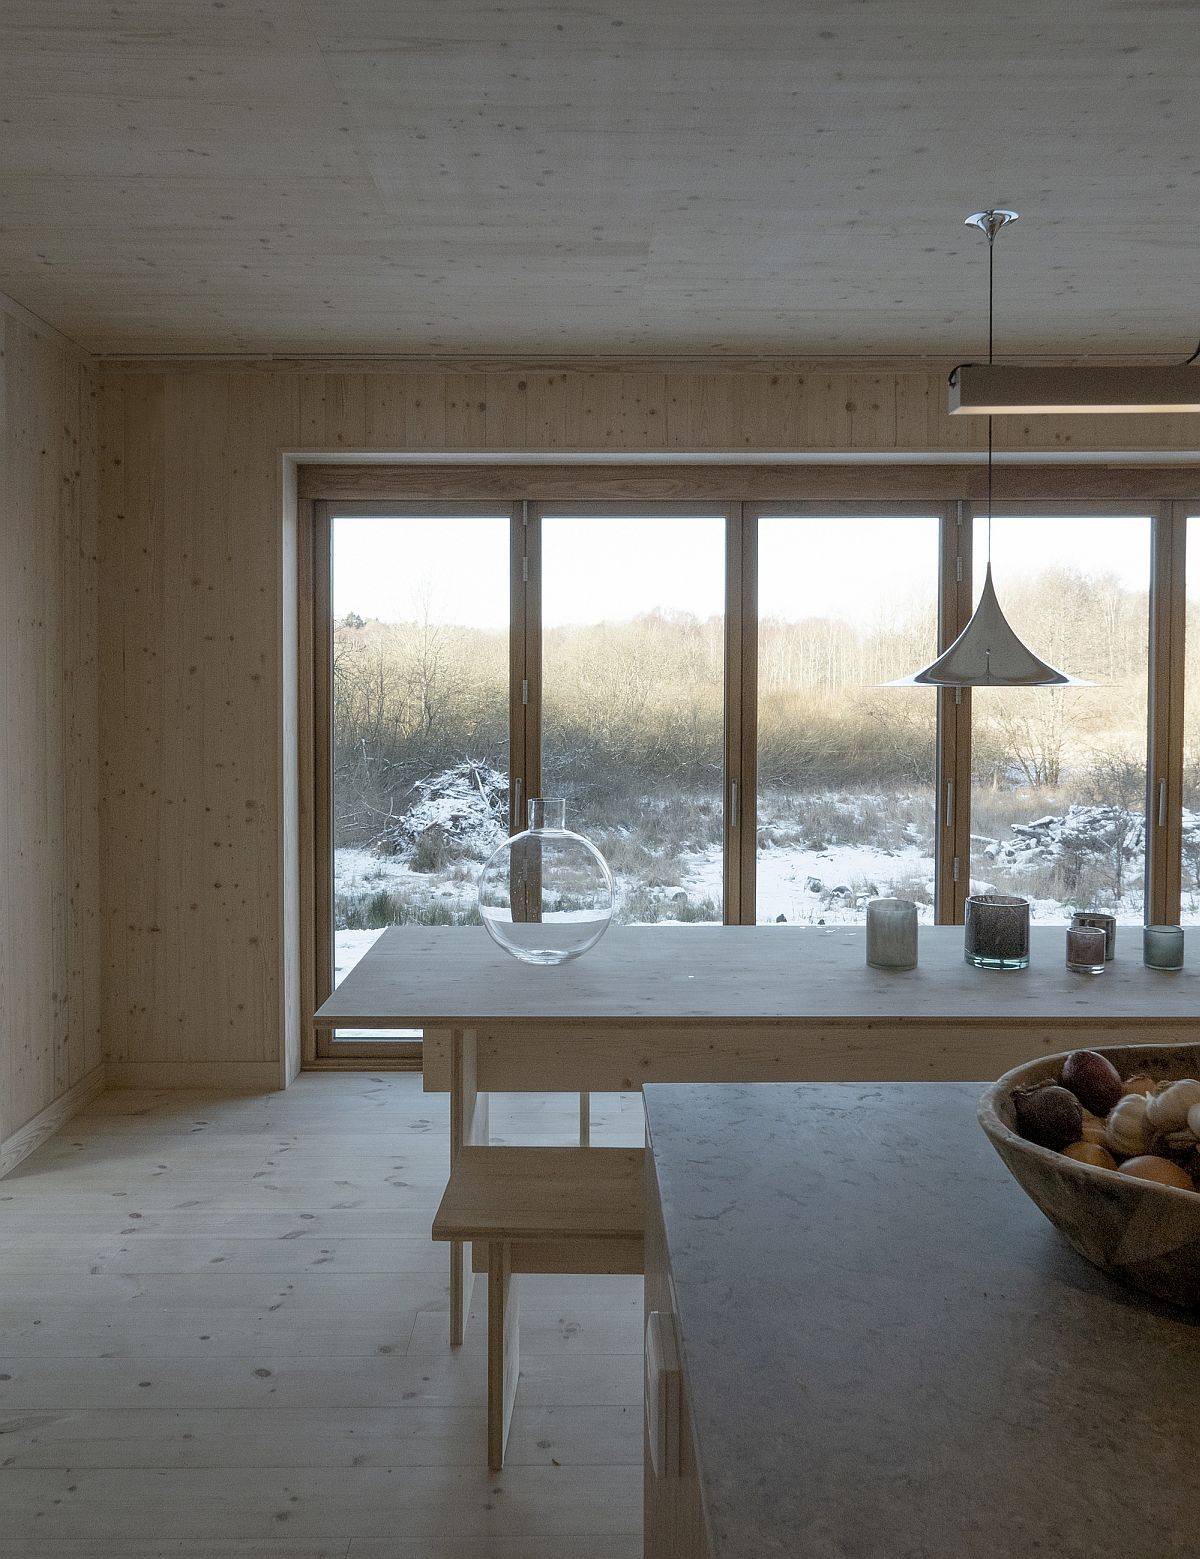 Kitchen and dining area of the Swedish home with lovely views